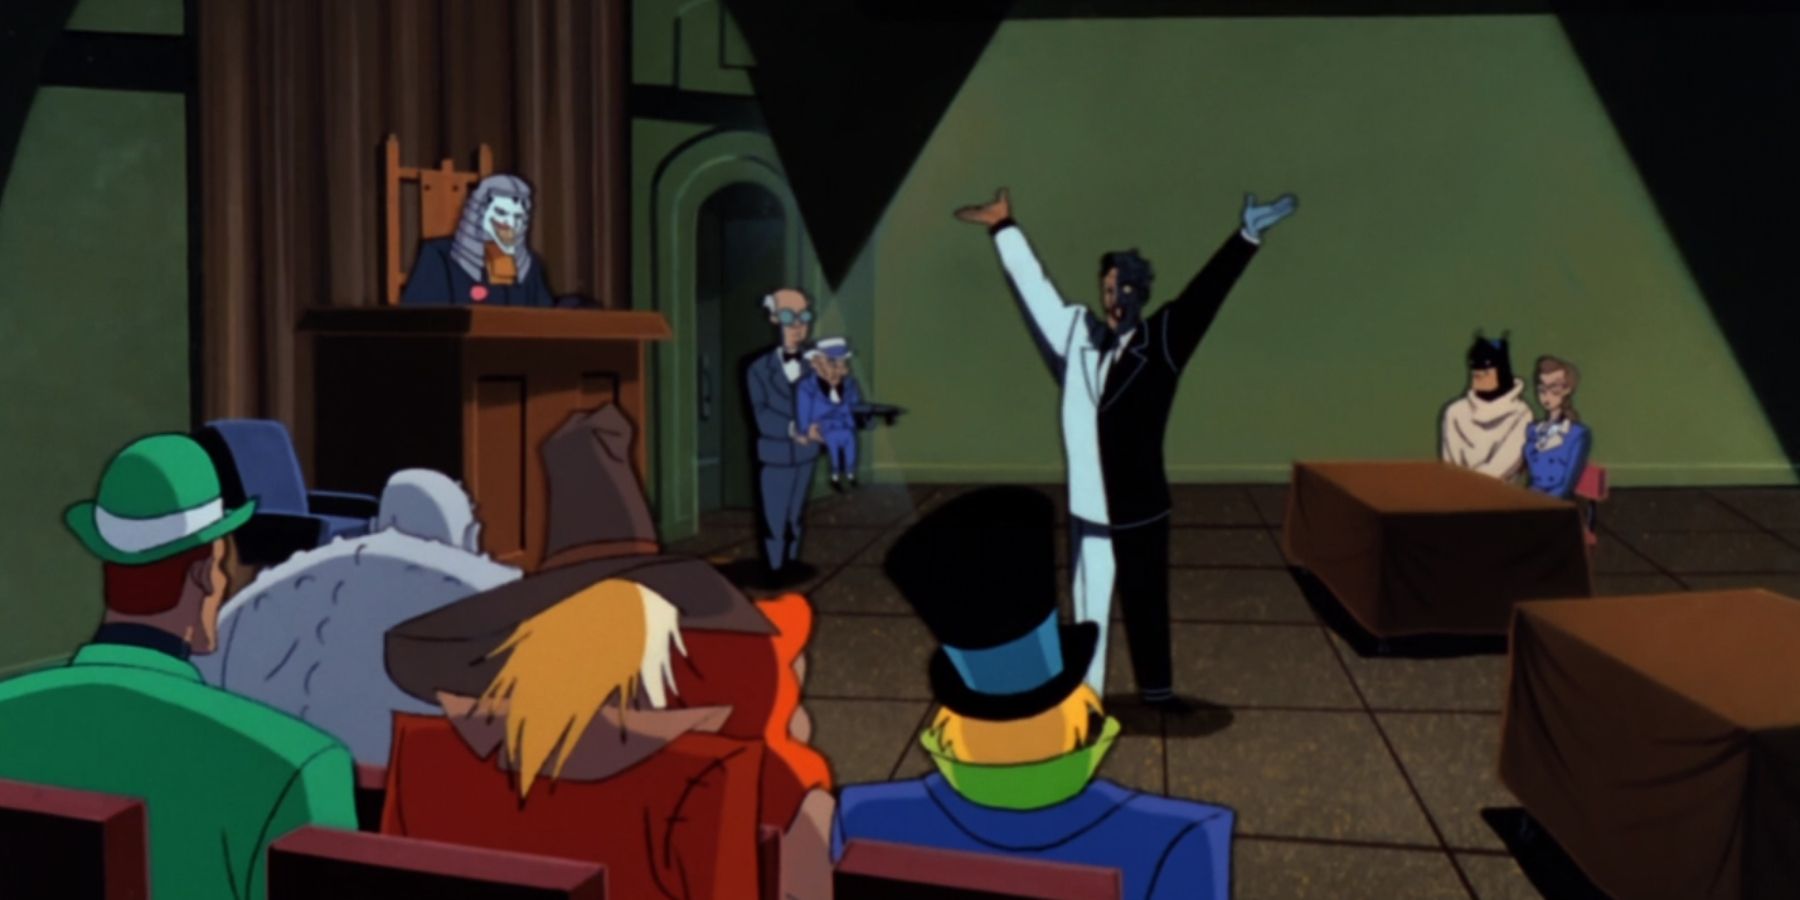 Batman being put on trial by Gotham's villains in Trial of Batman: The Animated Series